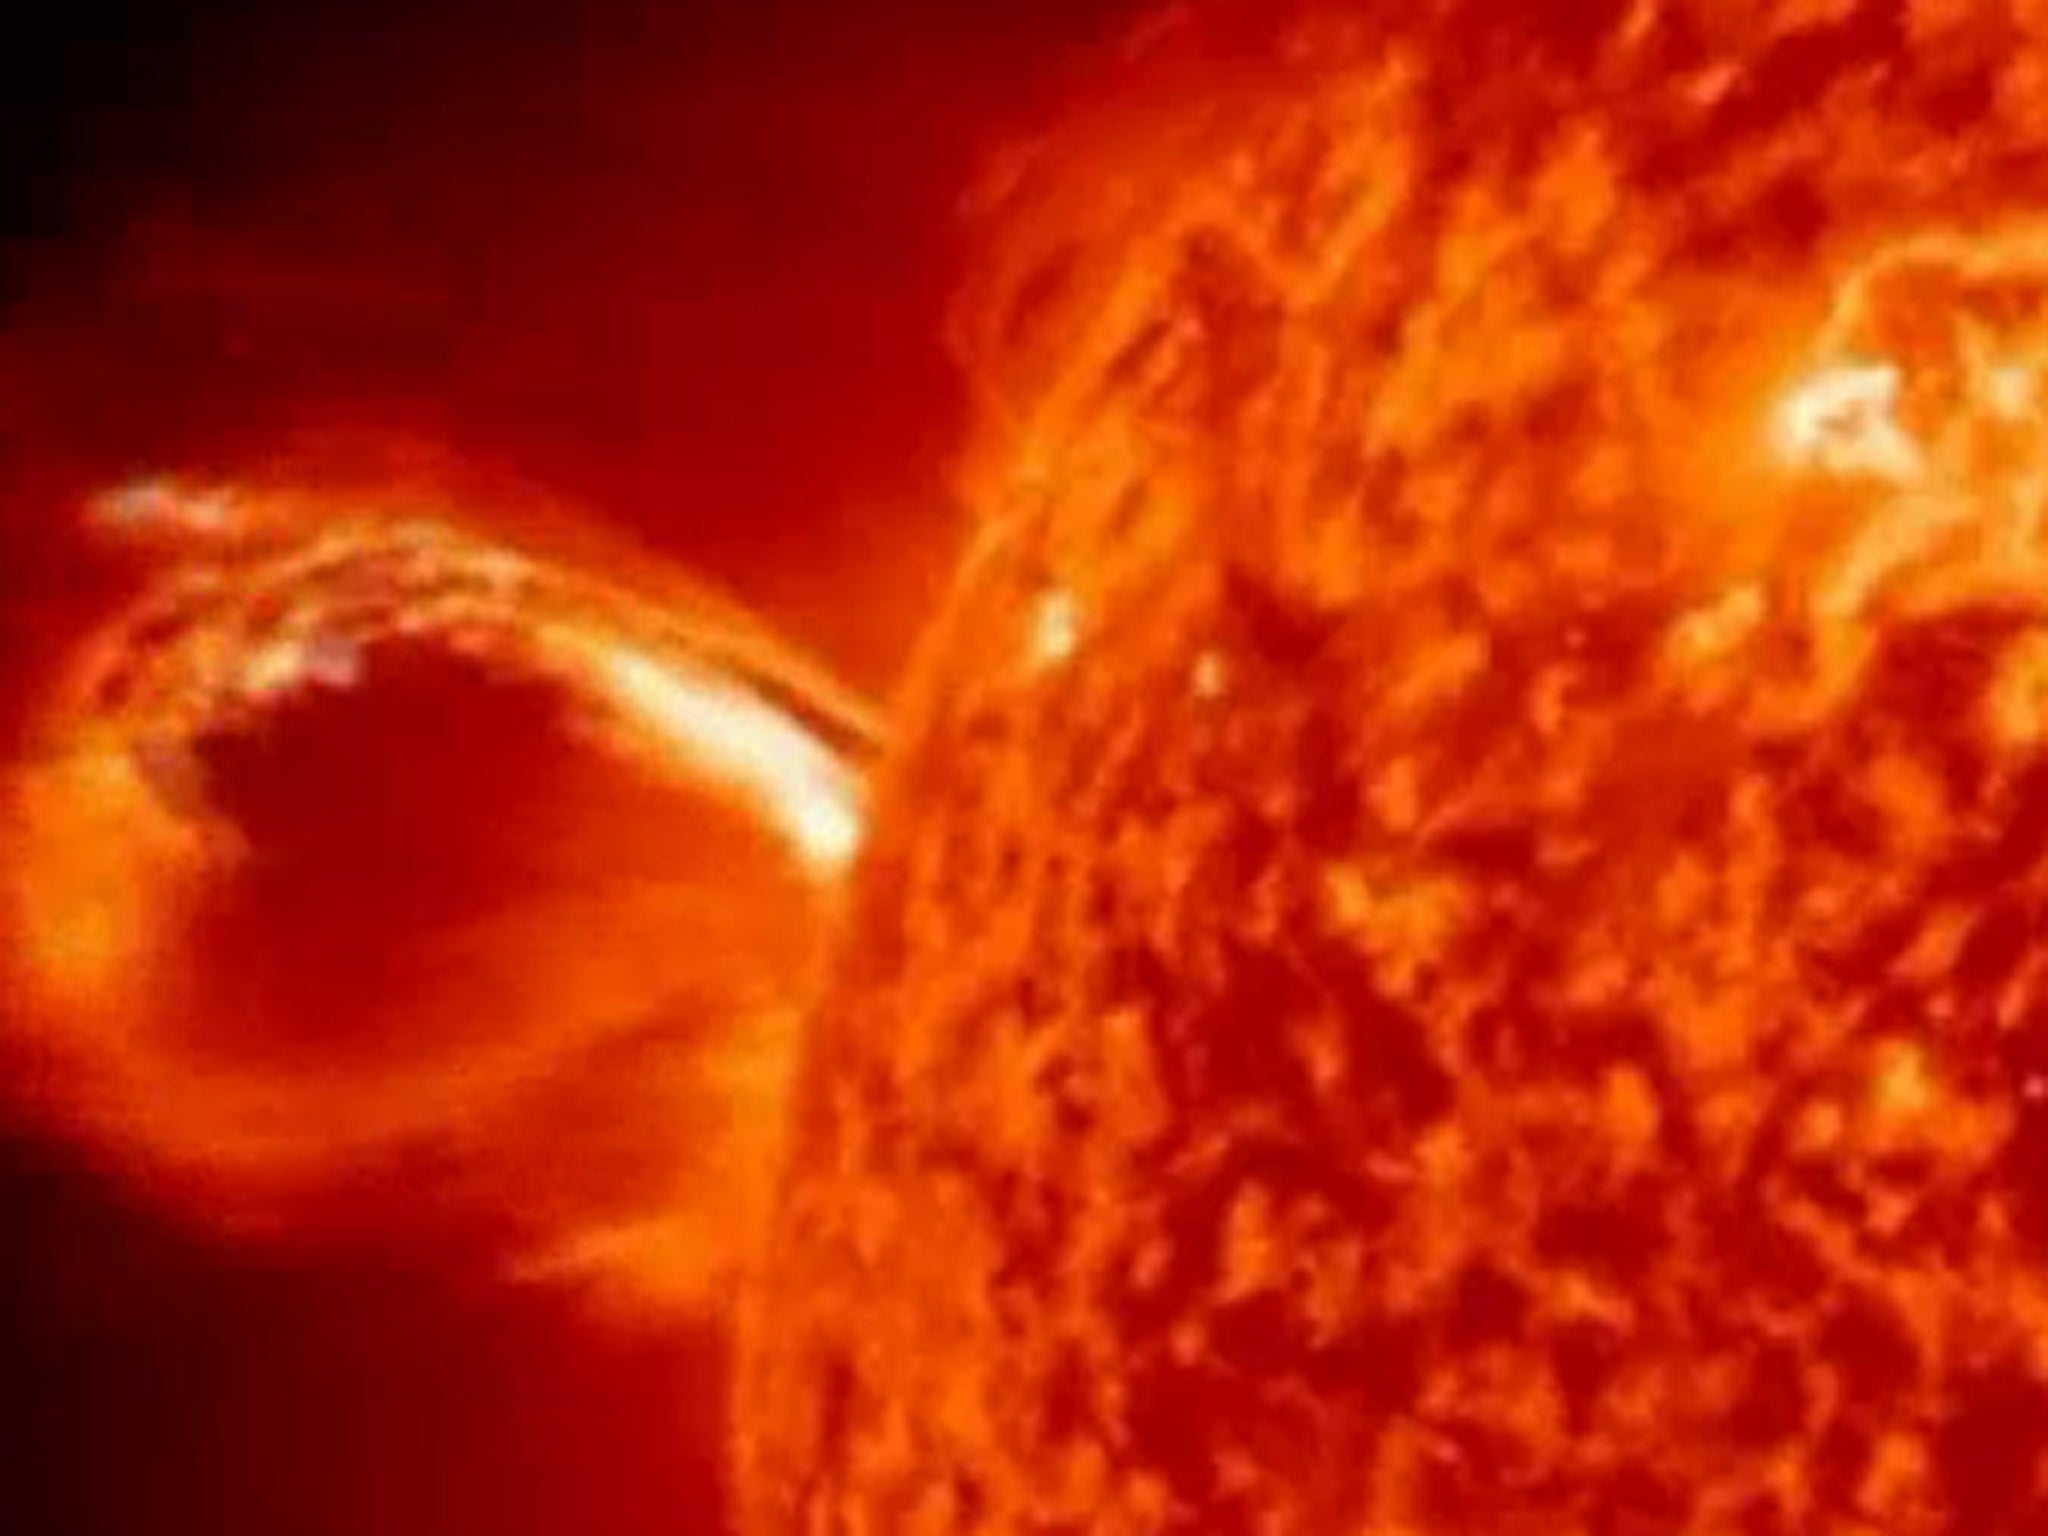 Video Nasa releases timelapse video of giant sun explosion The